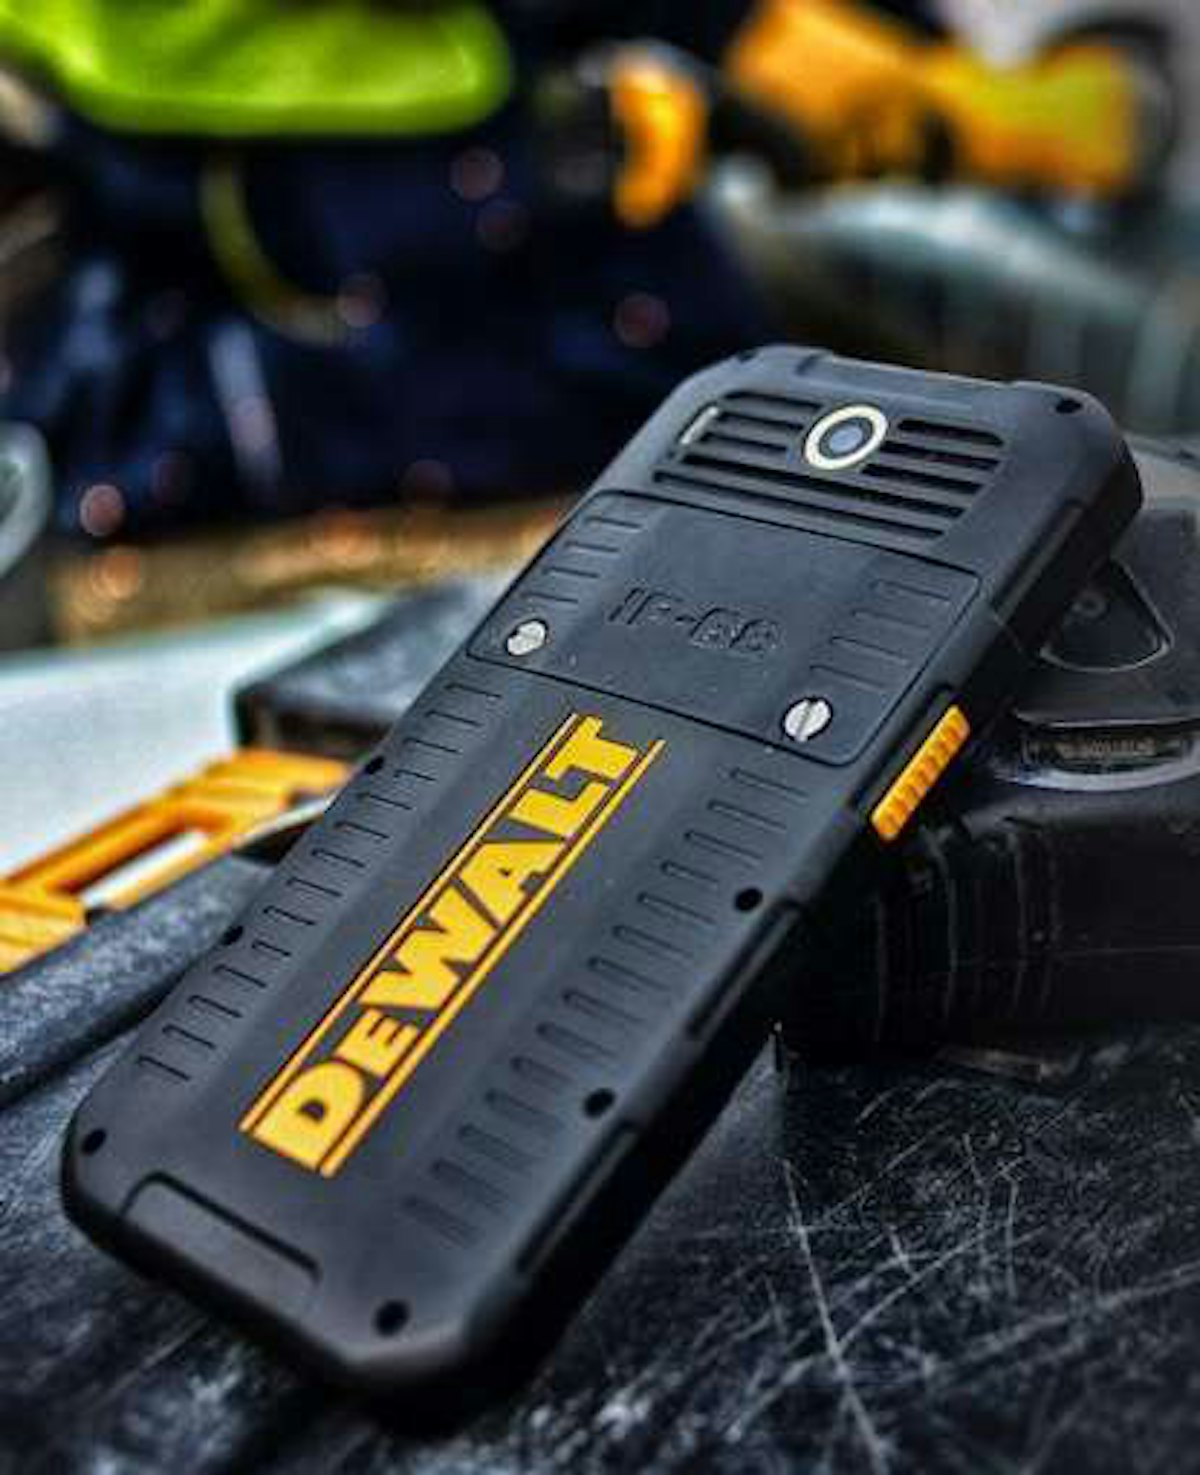 DeWalt unveils the A rugged phone construction going head-to-head with Cat | Equipment World